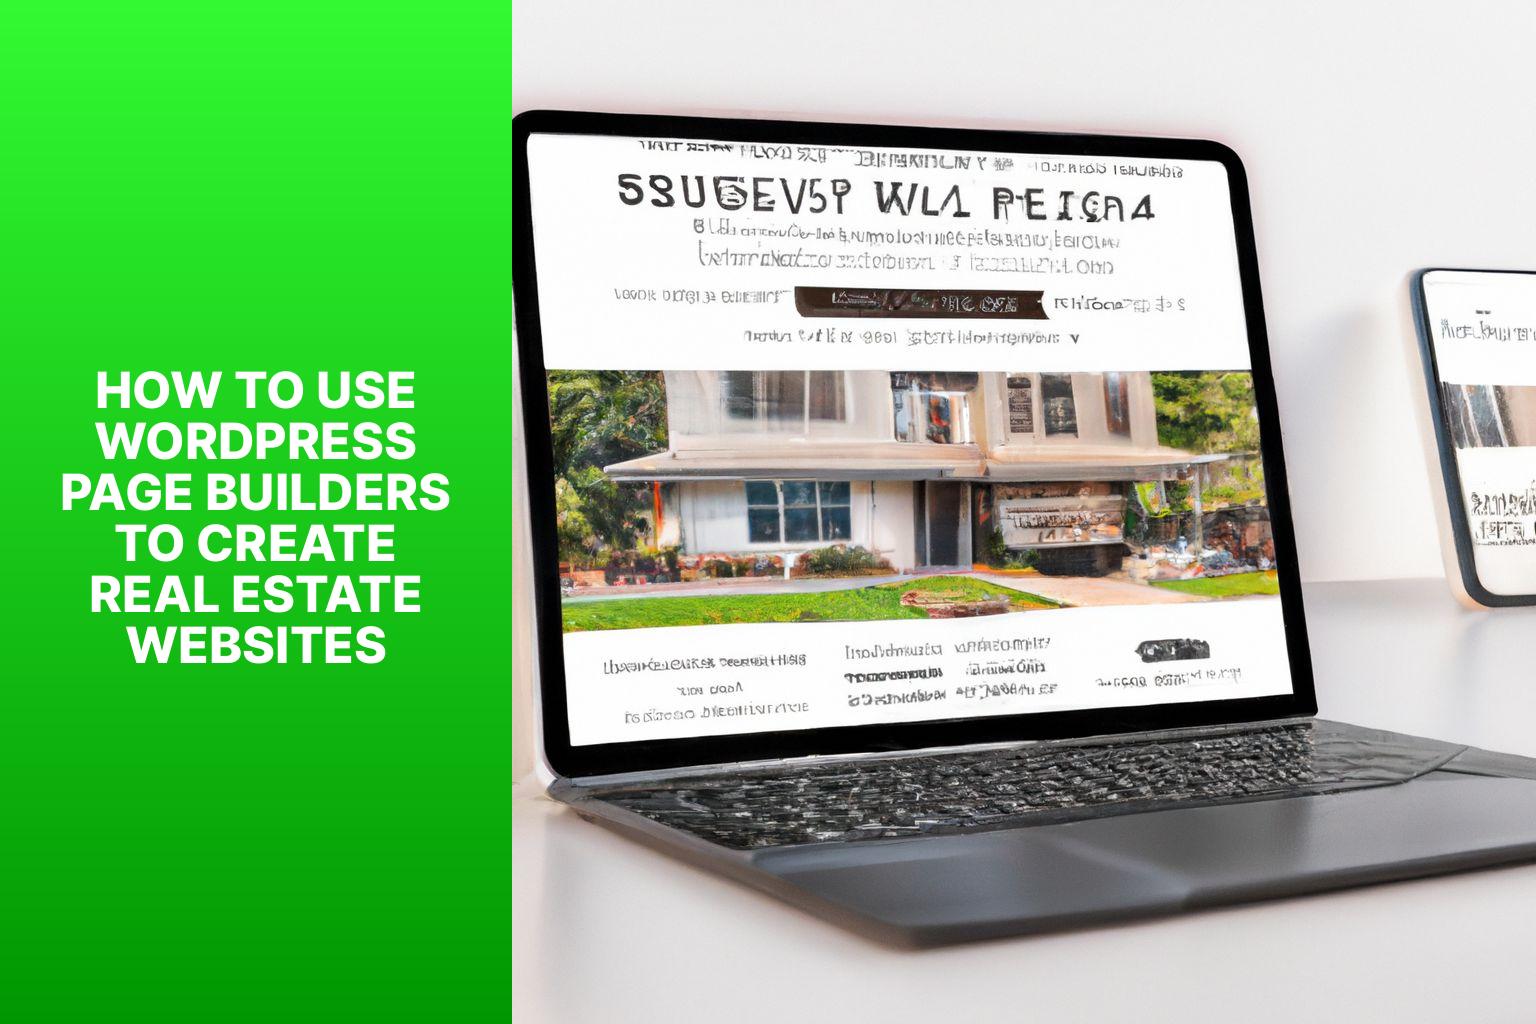 How to Use WordPress Page Builders to Create Real Estate Websites